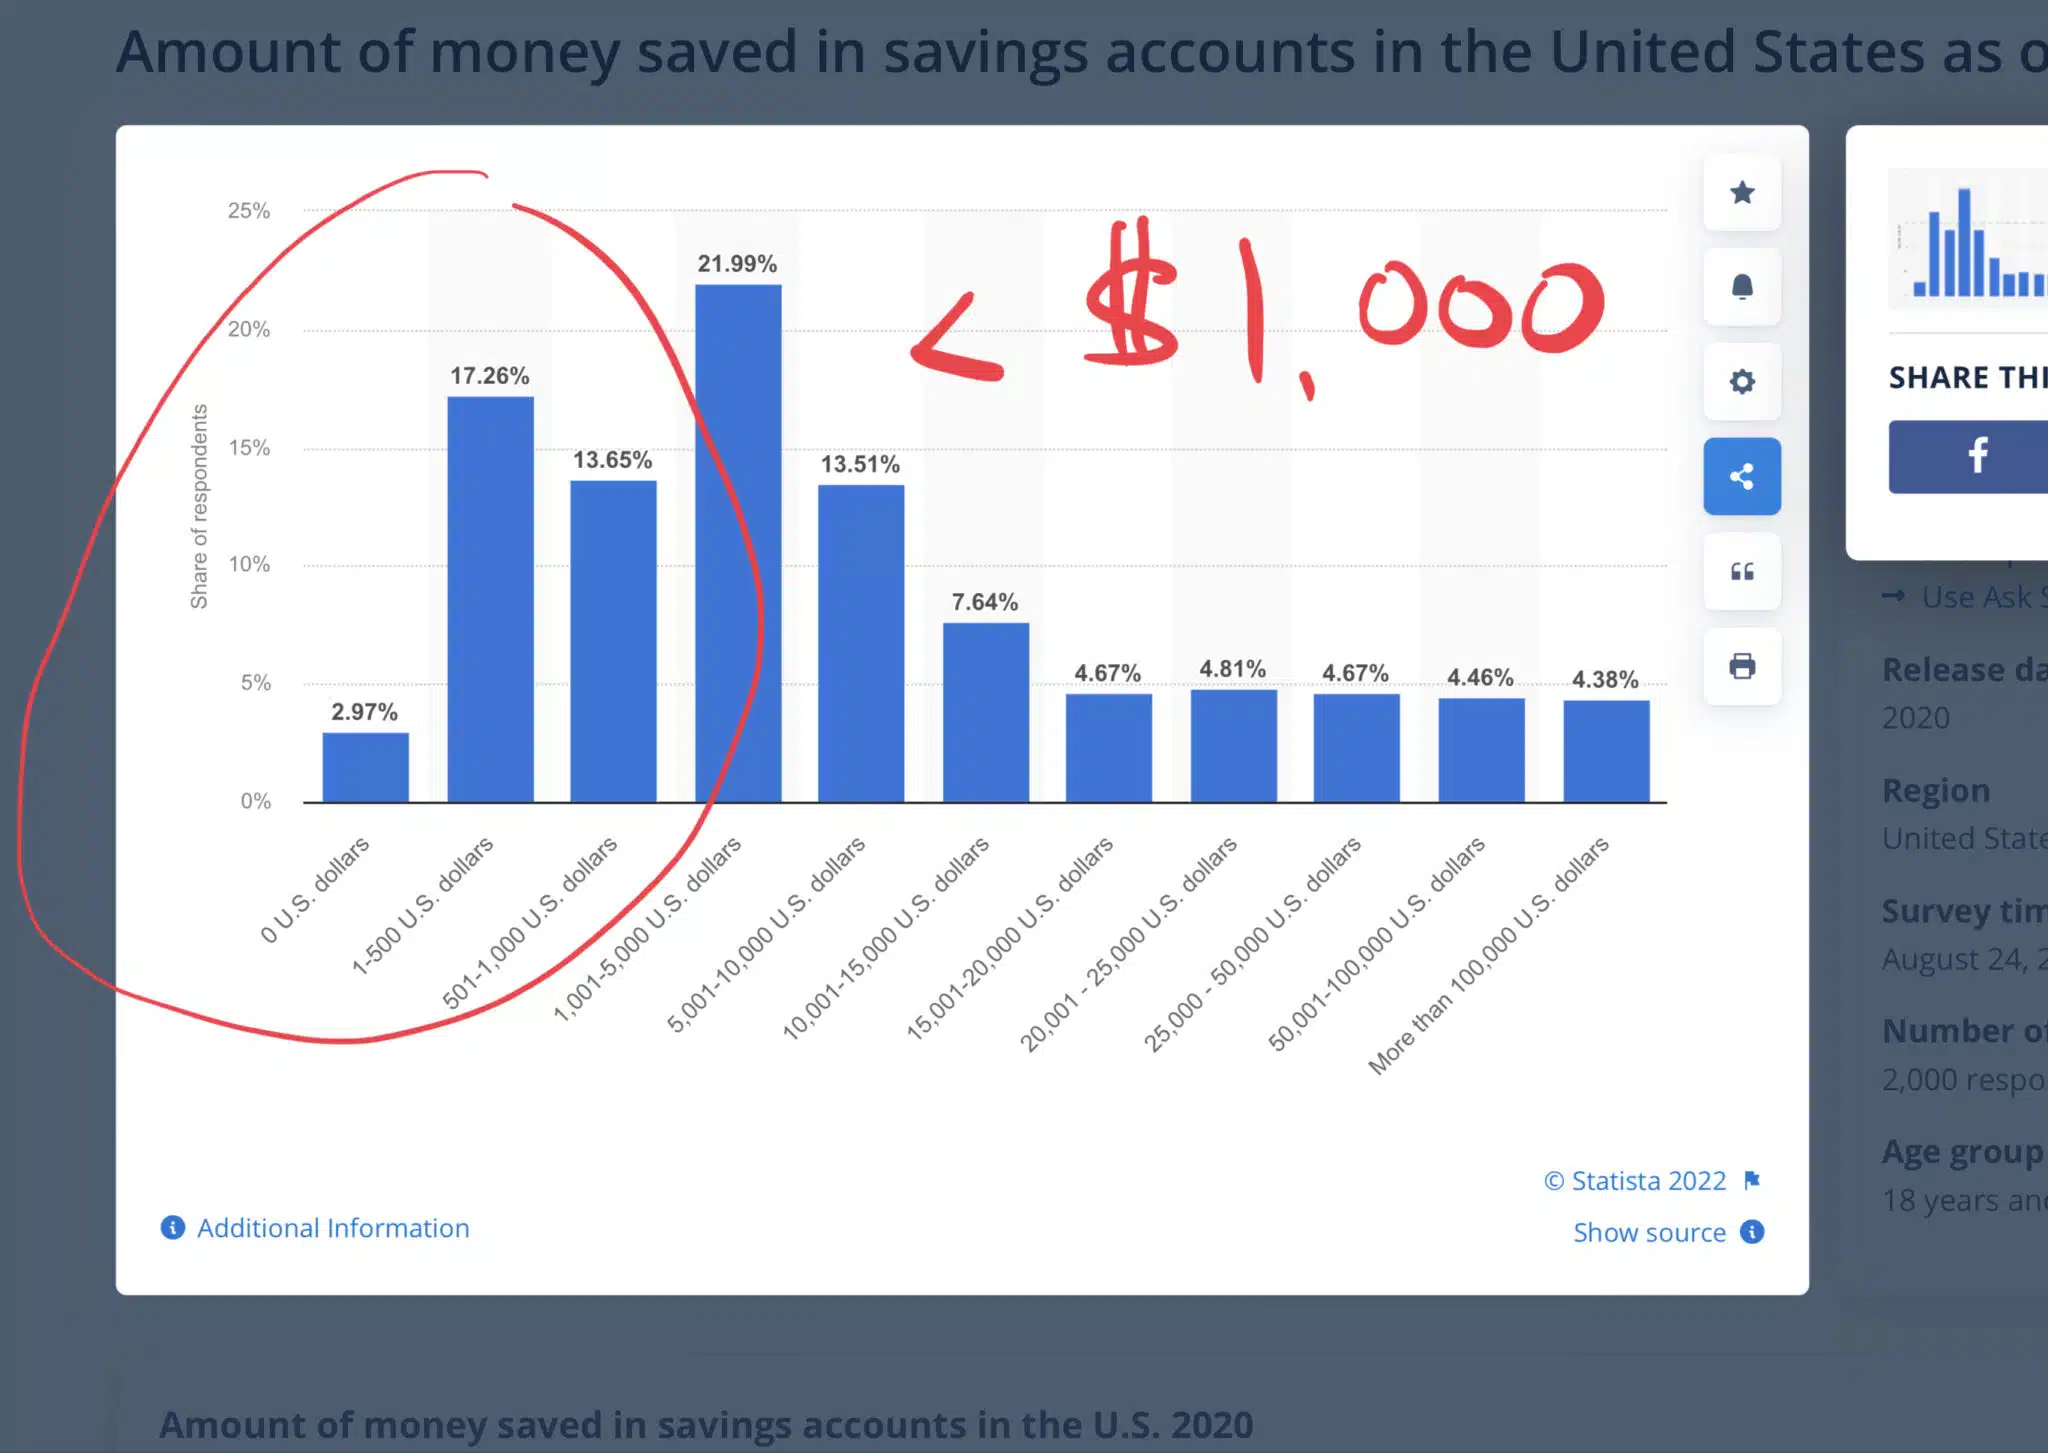 screenshot from Statista.com that shows only 34% of Americans had less than $1,000 in their savings accounts.